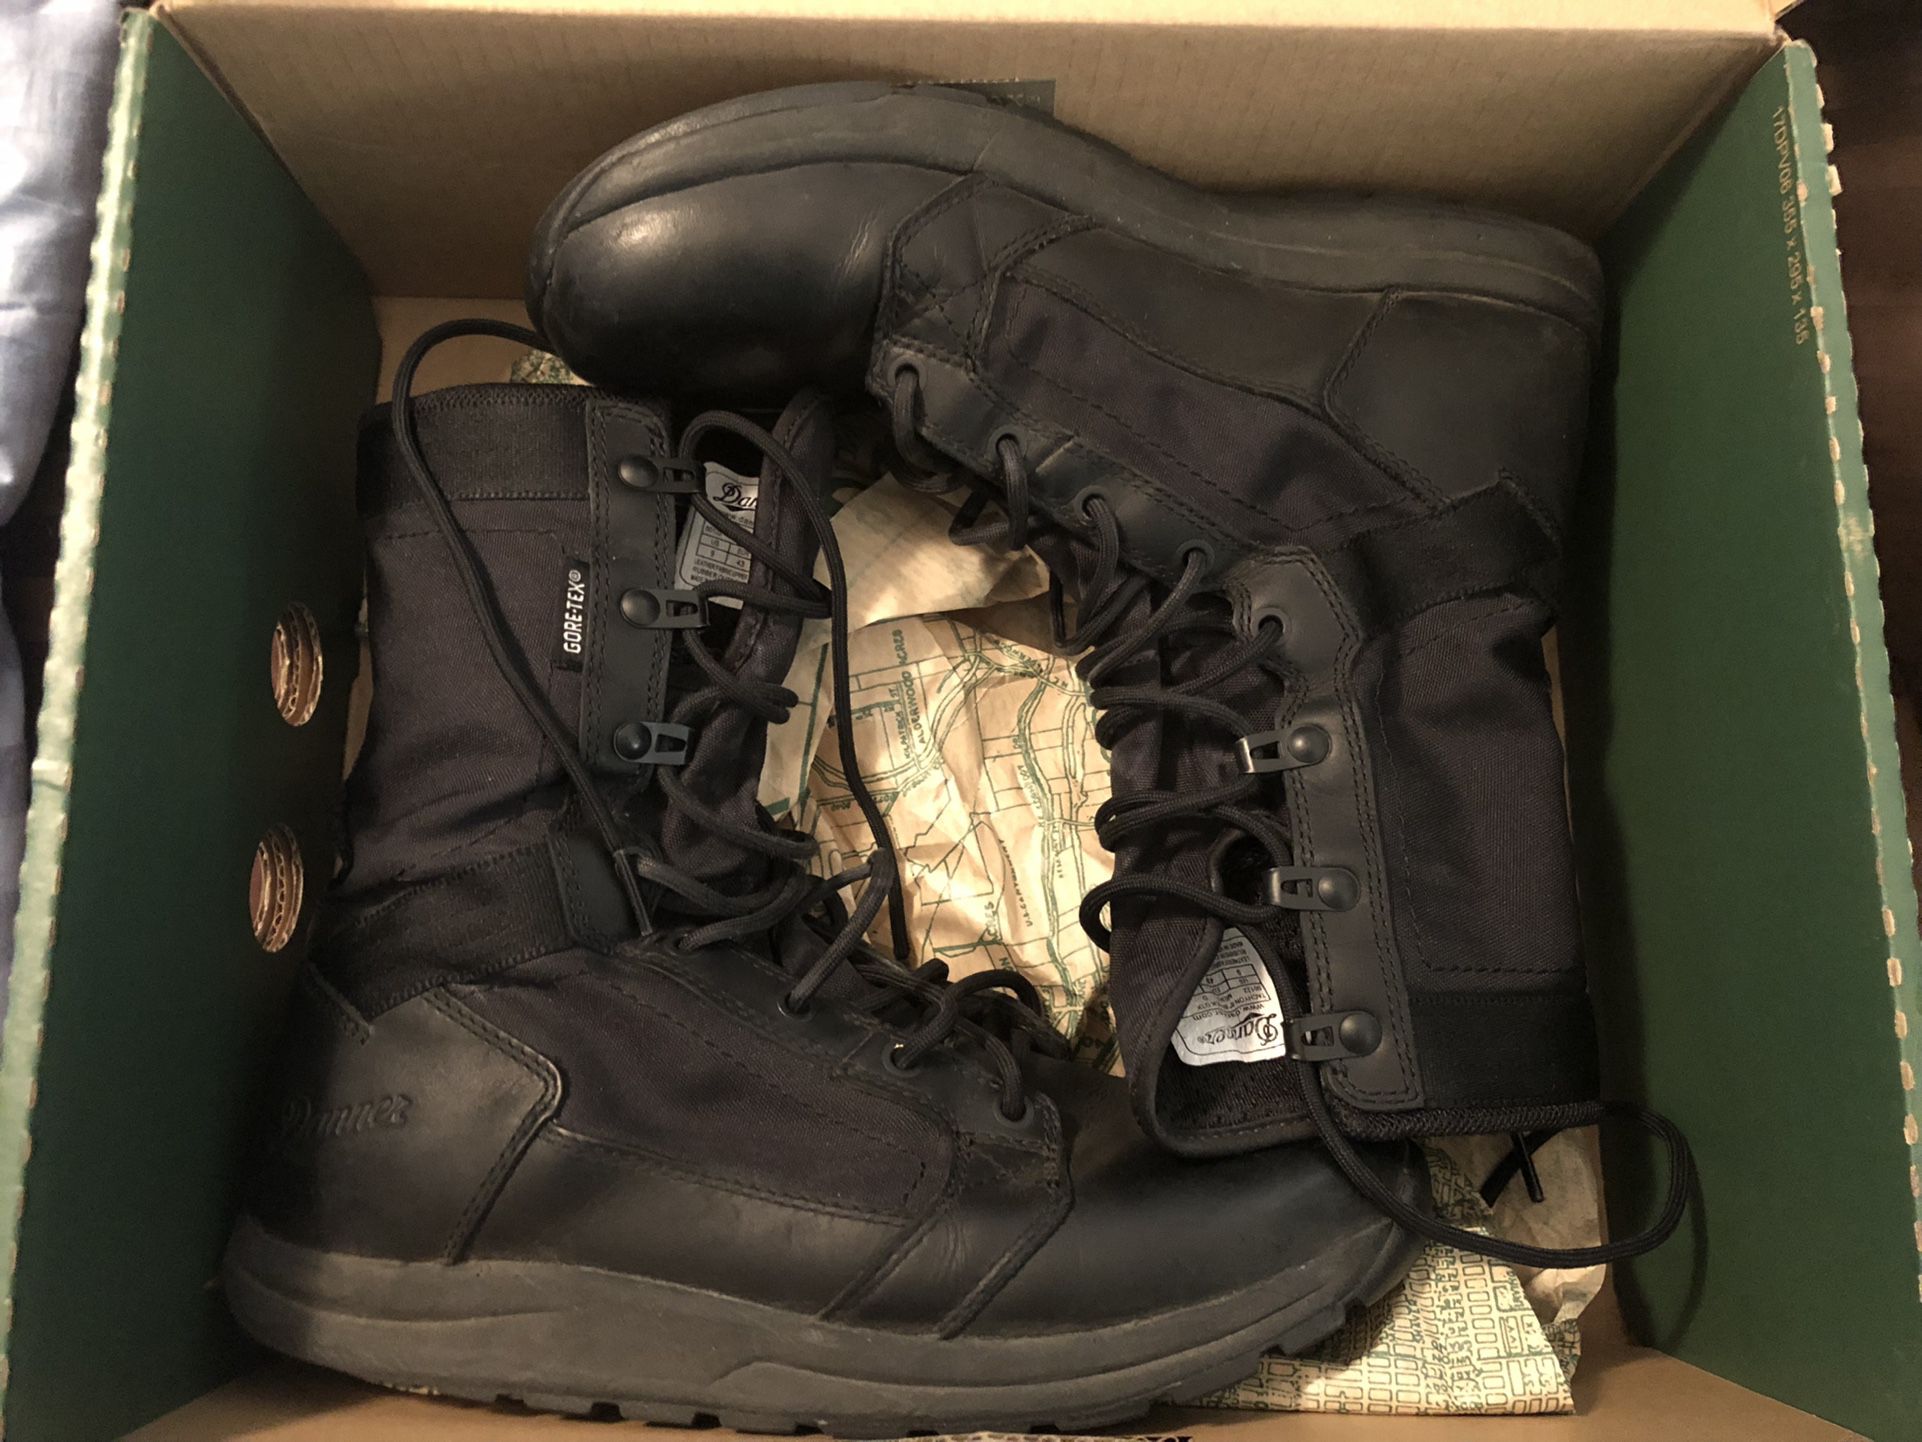 Danner Gore-Tex Boots - Size 9